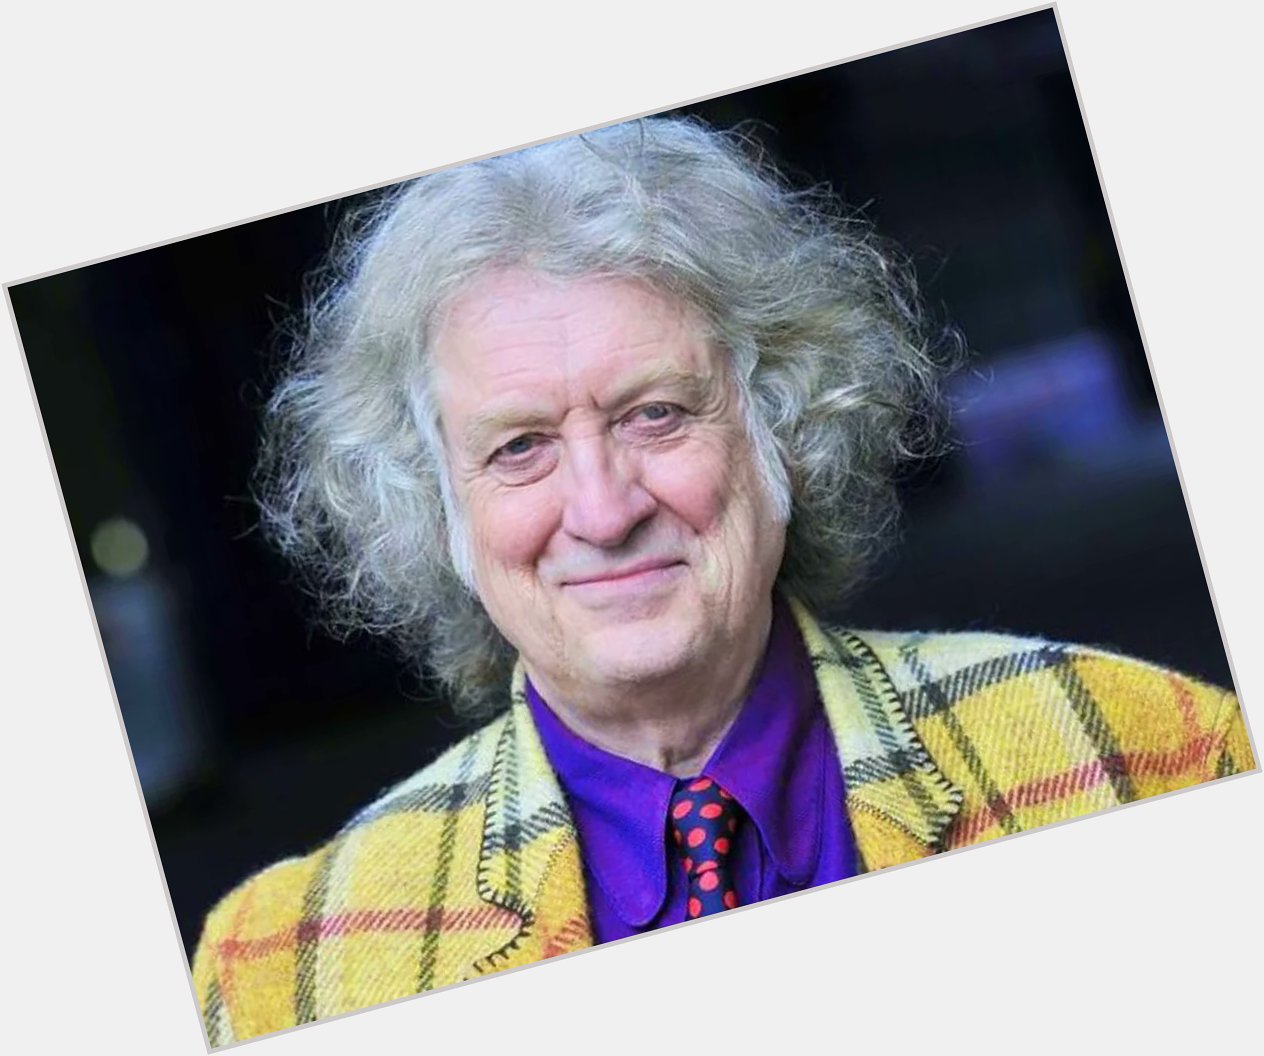 Everyone shout out hip hip hooray and happy birthday to Slade singer Noddy Holder!!   